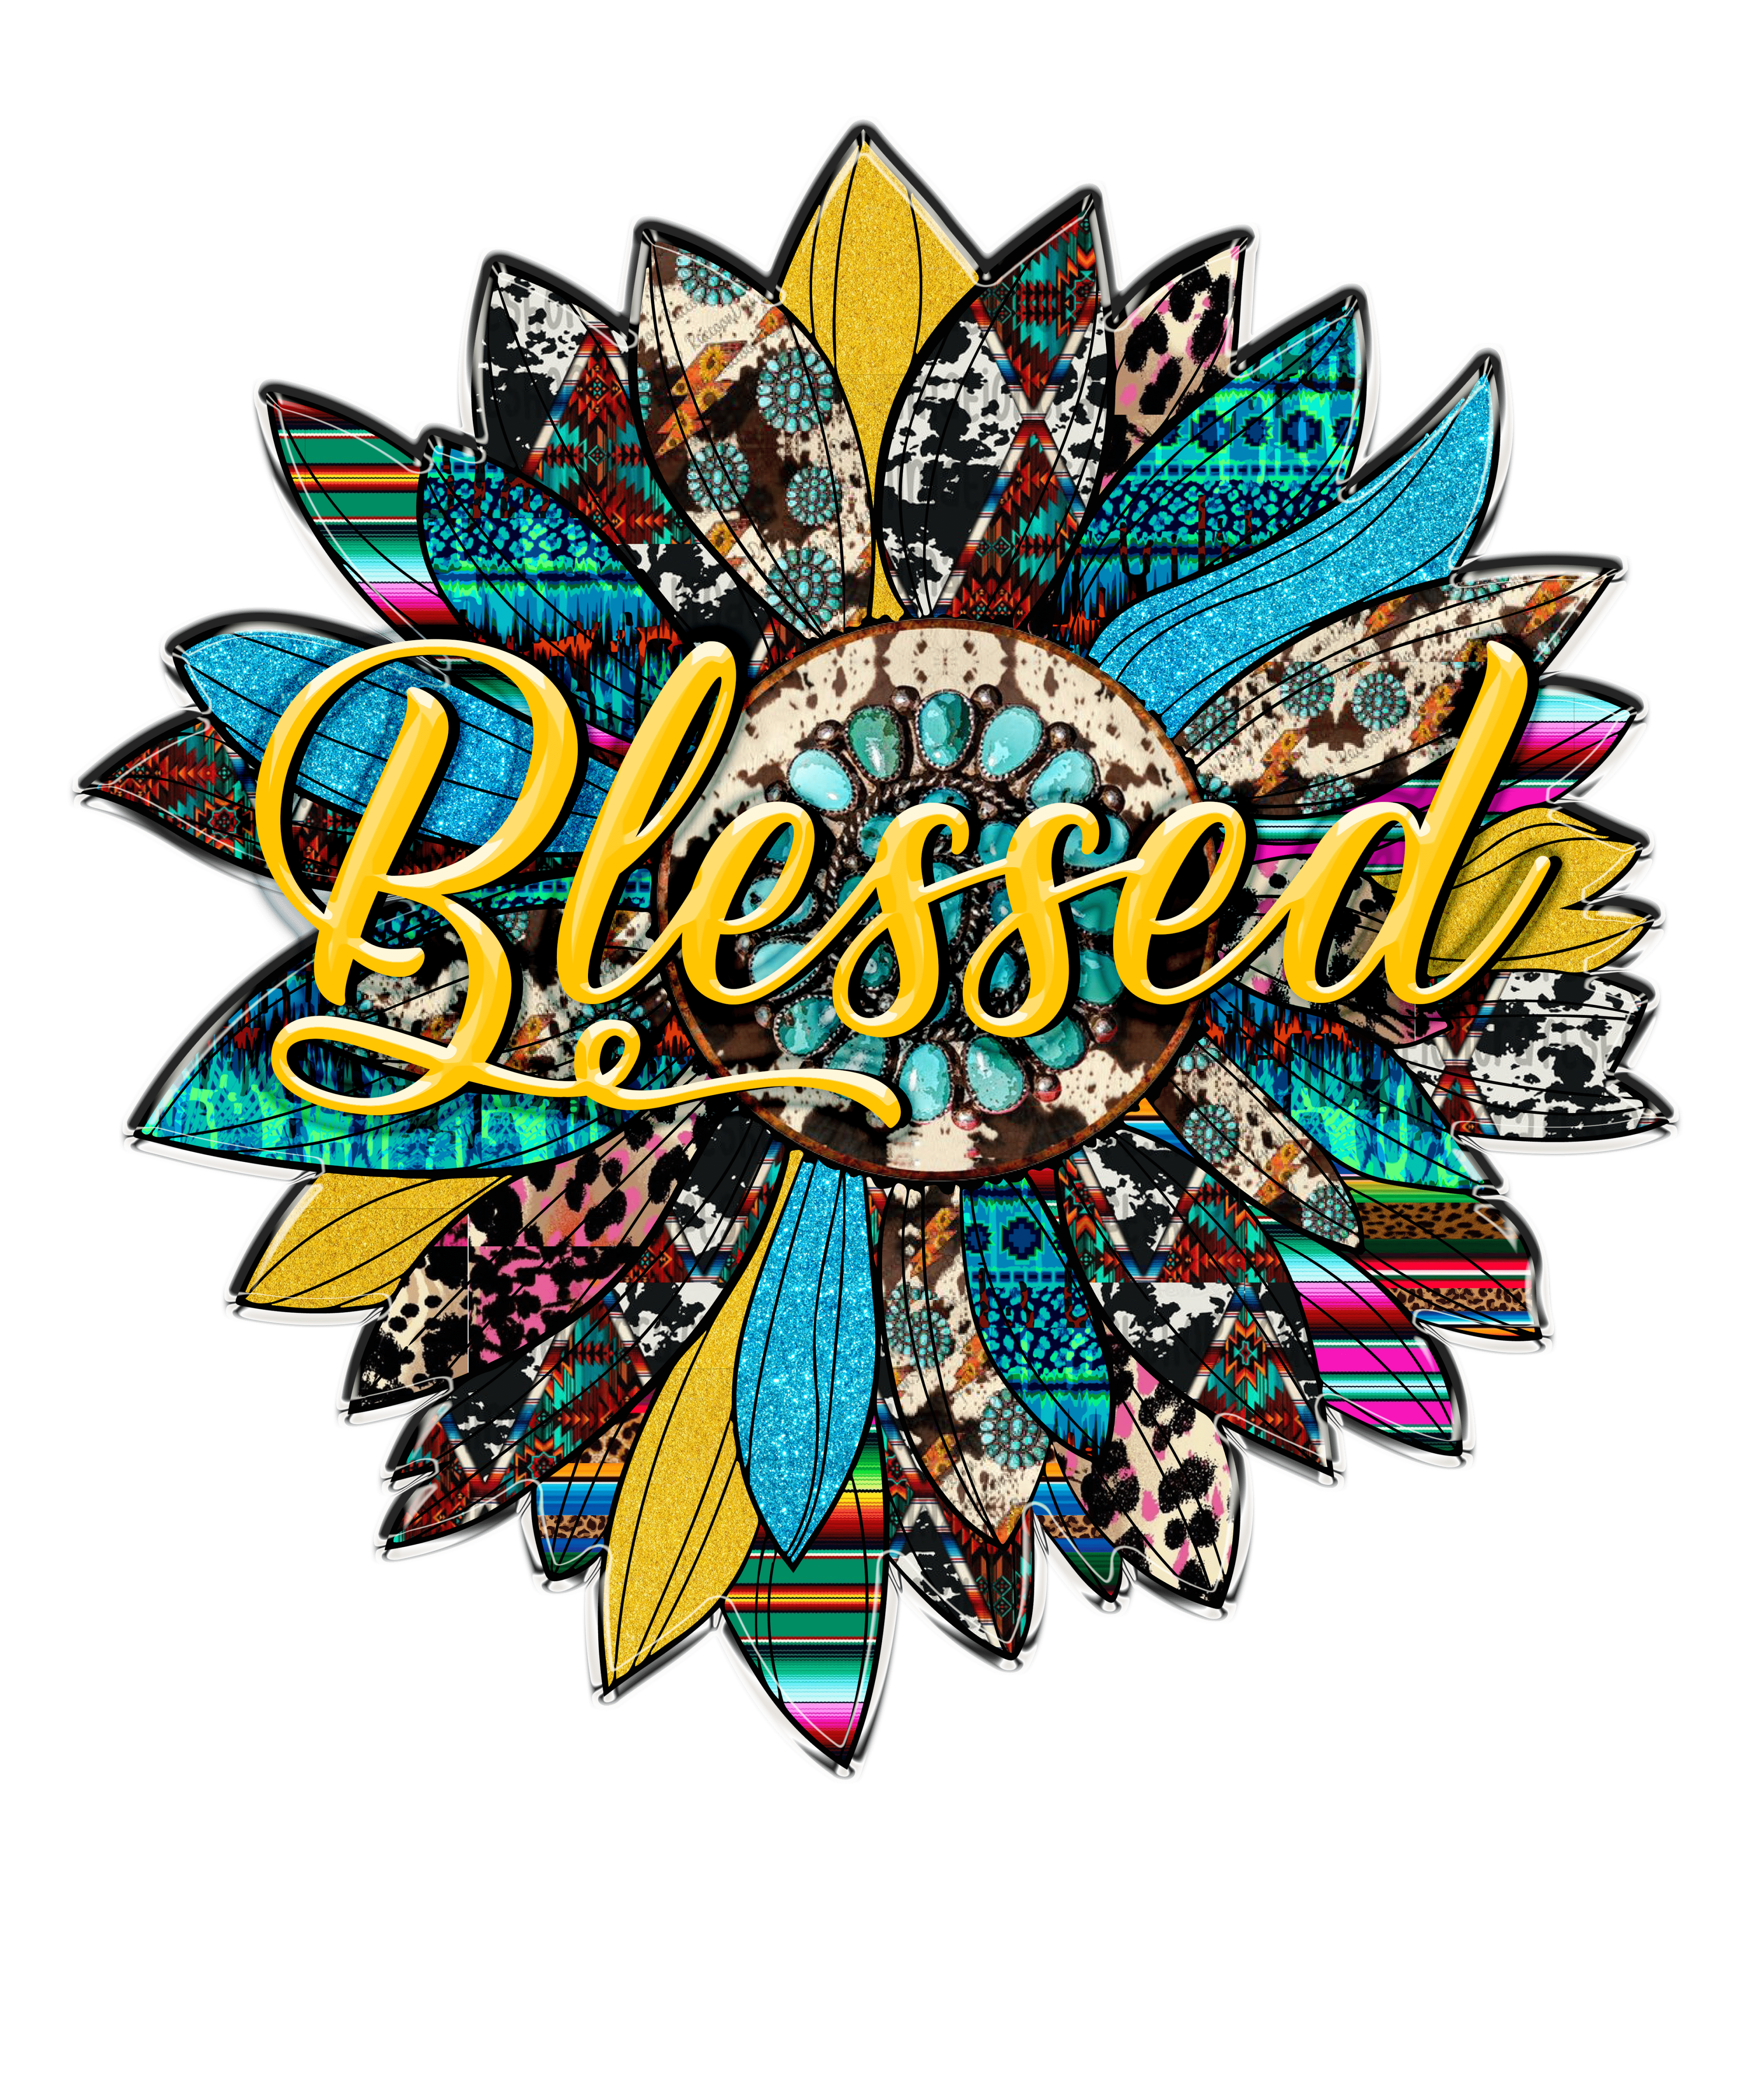 Sublimation Prints - Blessed Western Sunflower - The Vinyl Haus